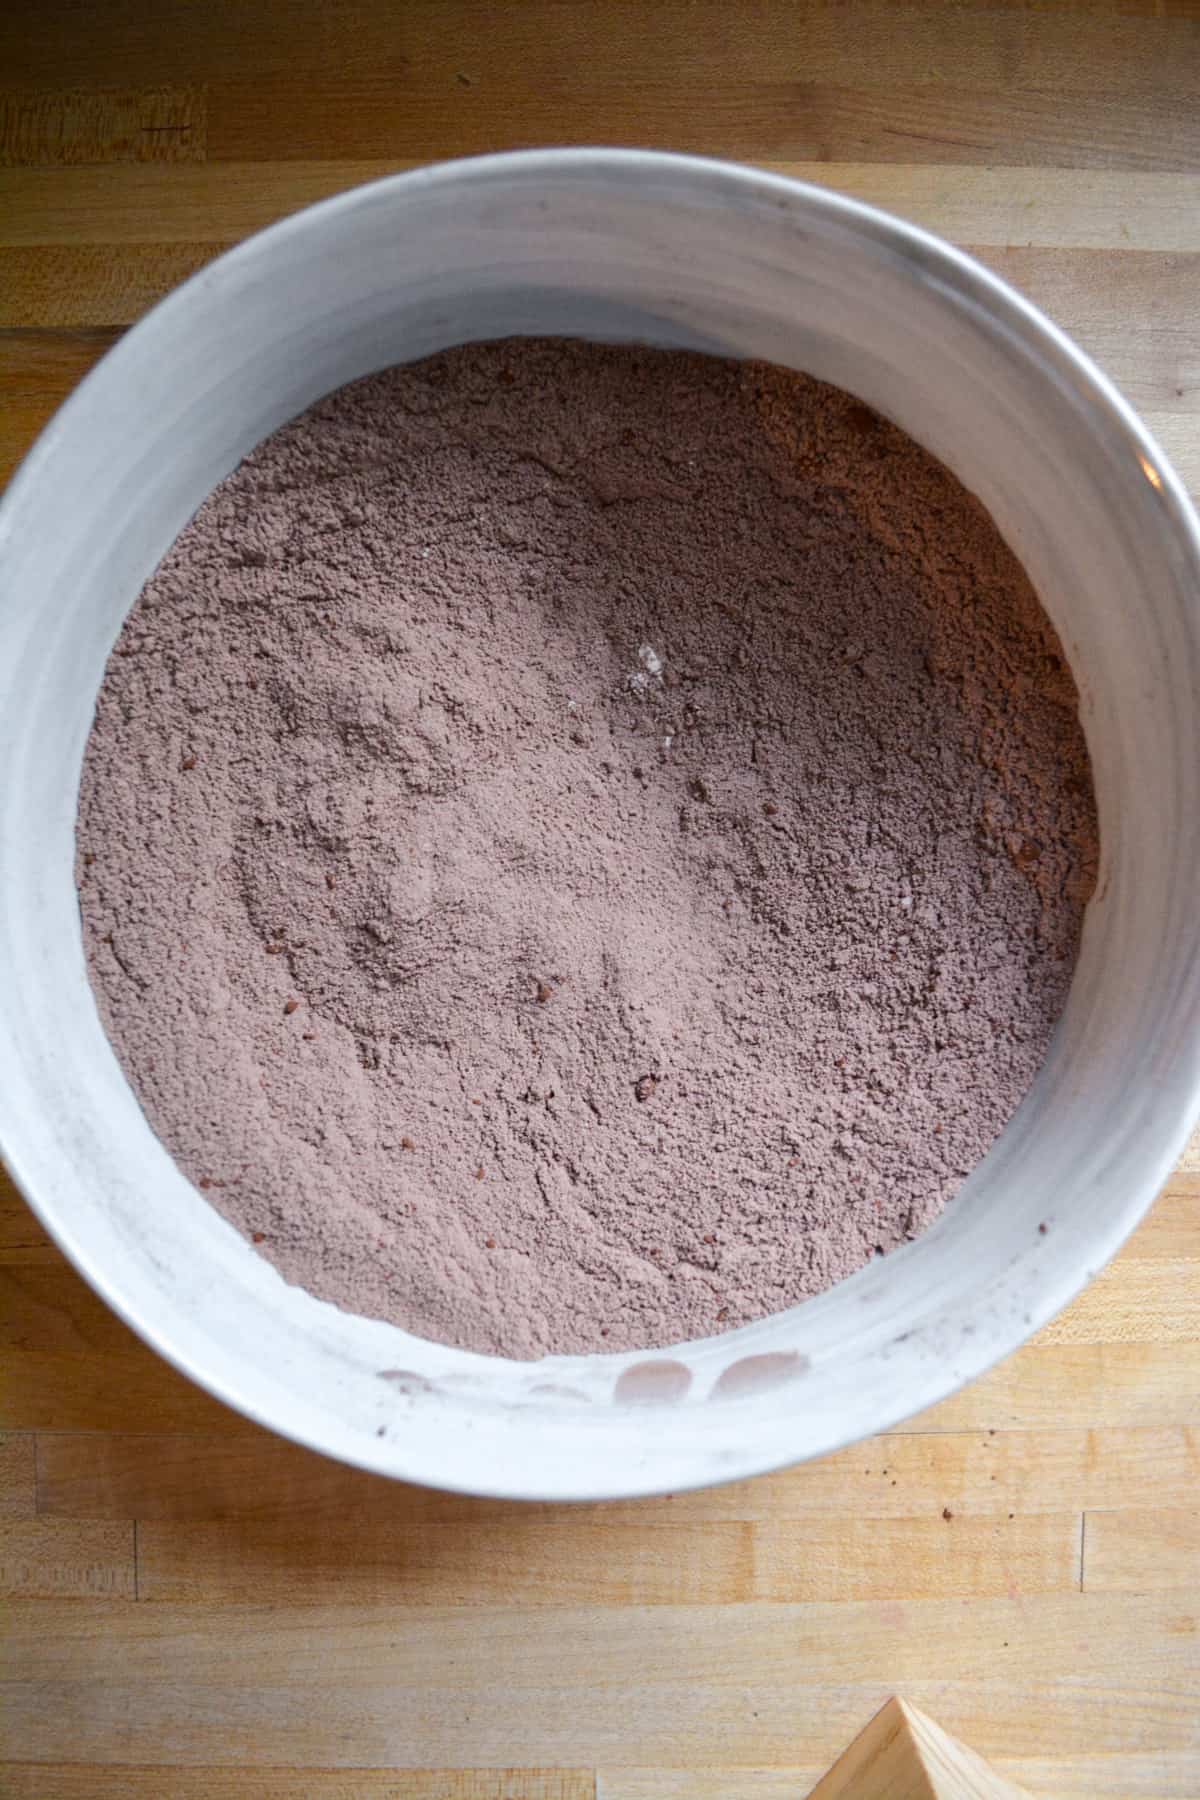 Dry ingredients for the cake mixed together in a large mixing bowl.